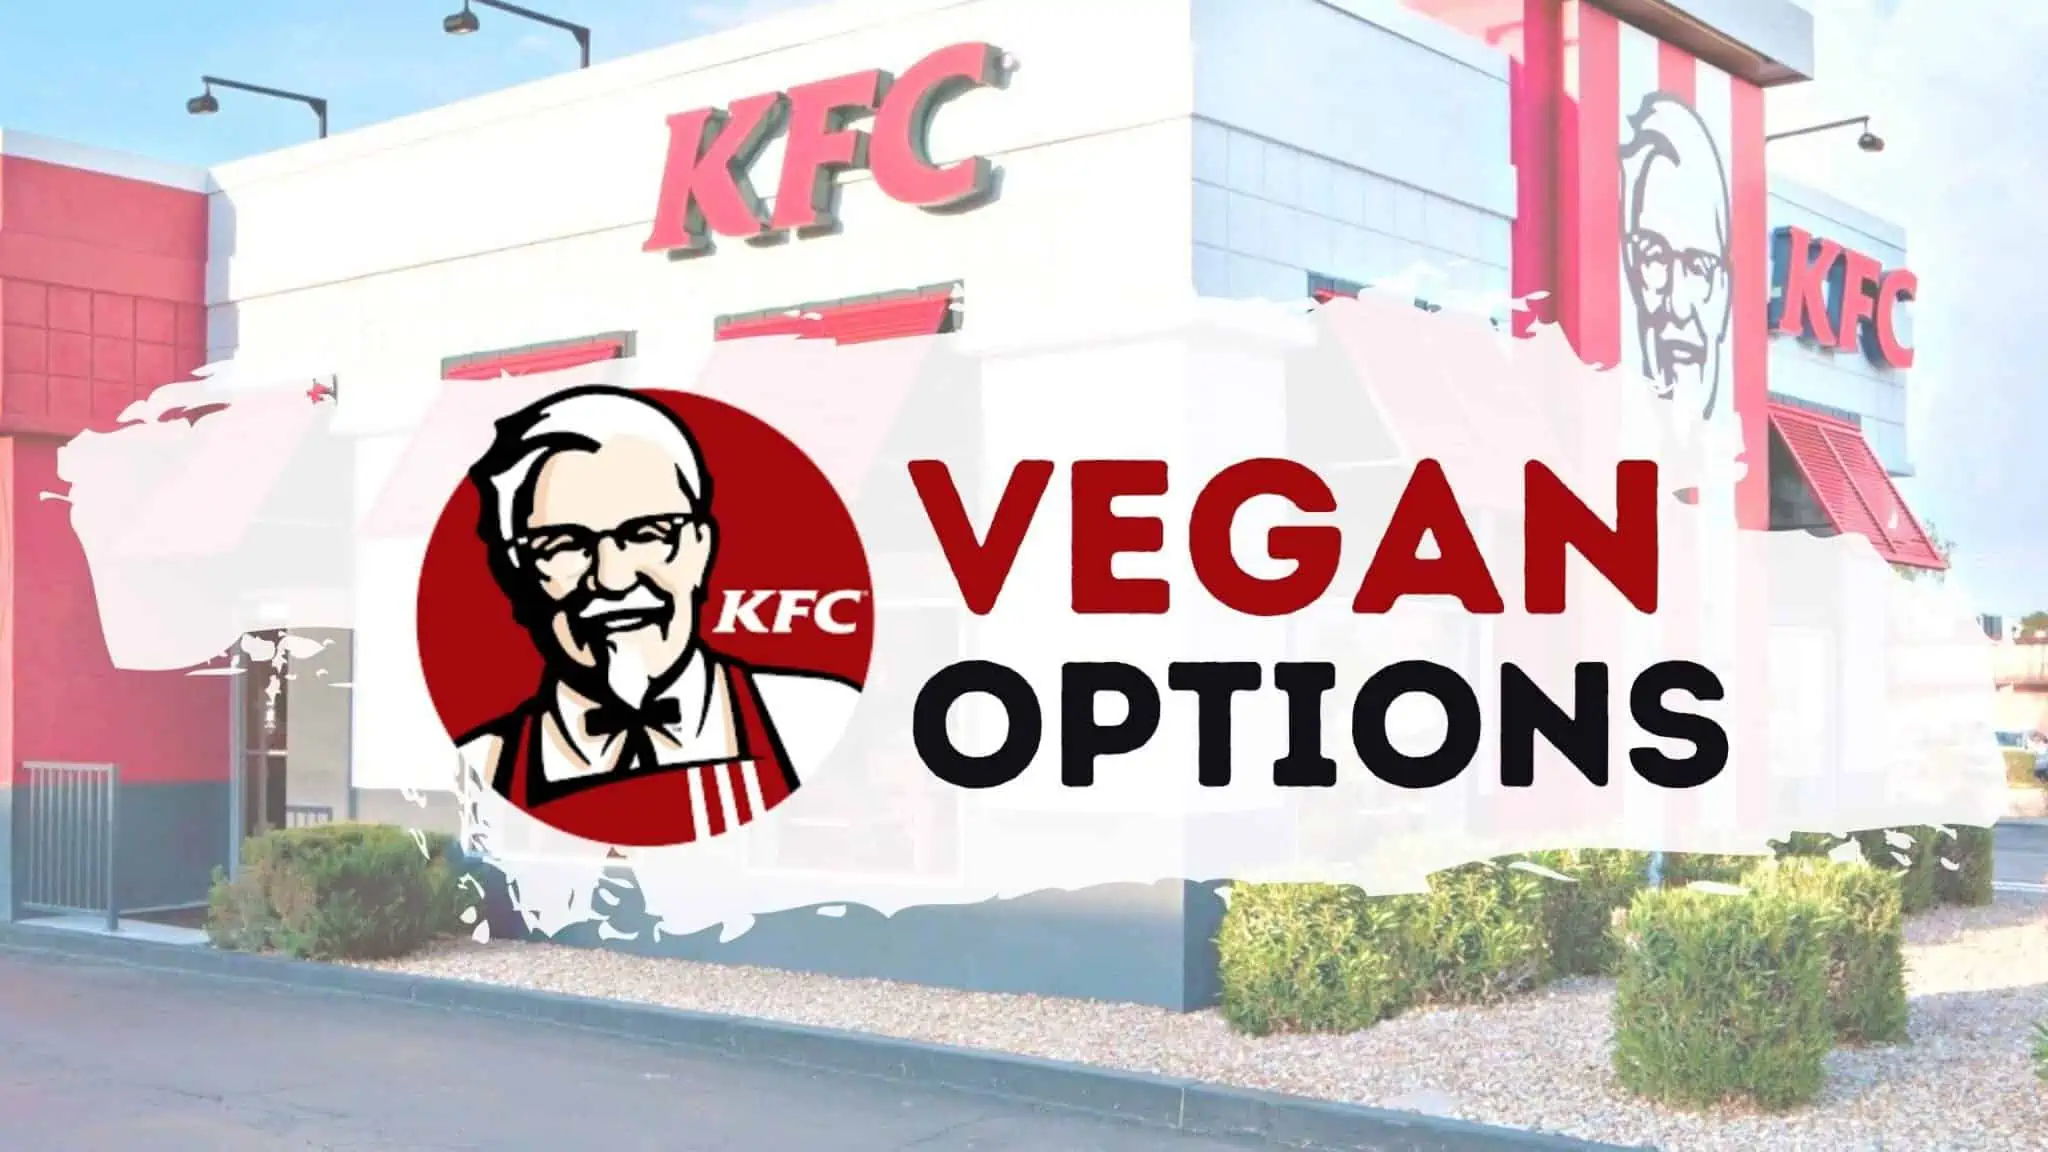 How to Order Vegan at KFC Kentucky Fried Chicken Guide.